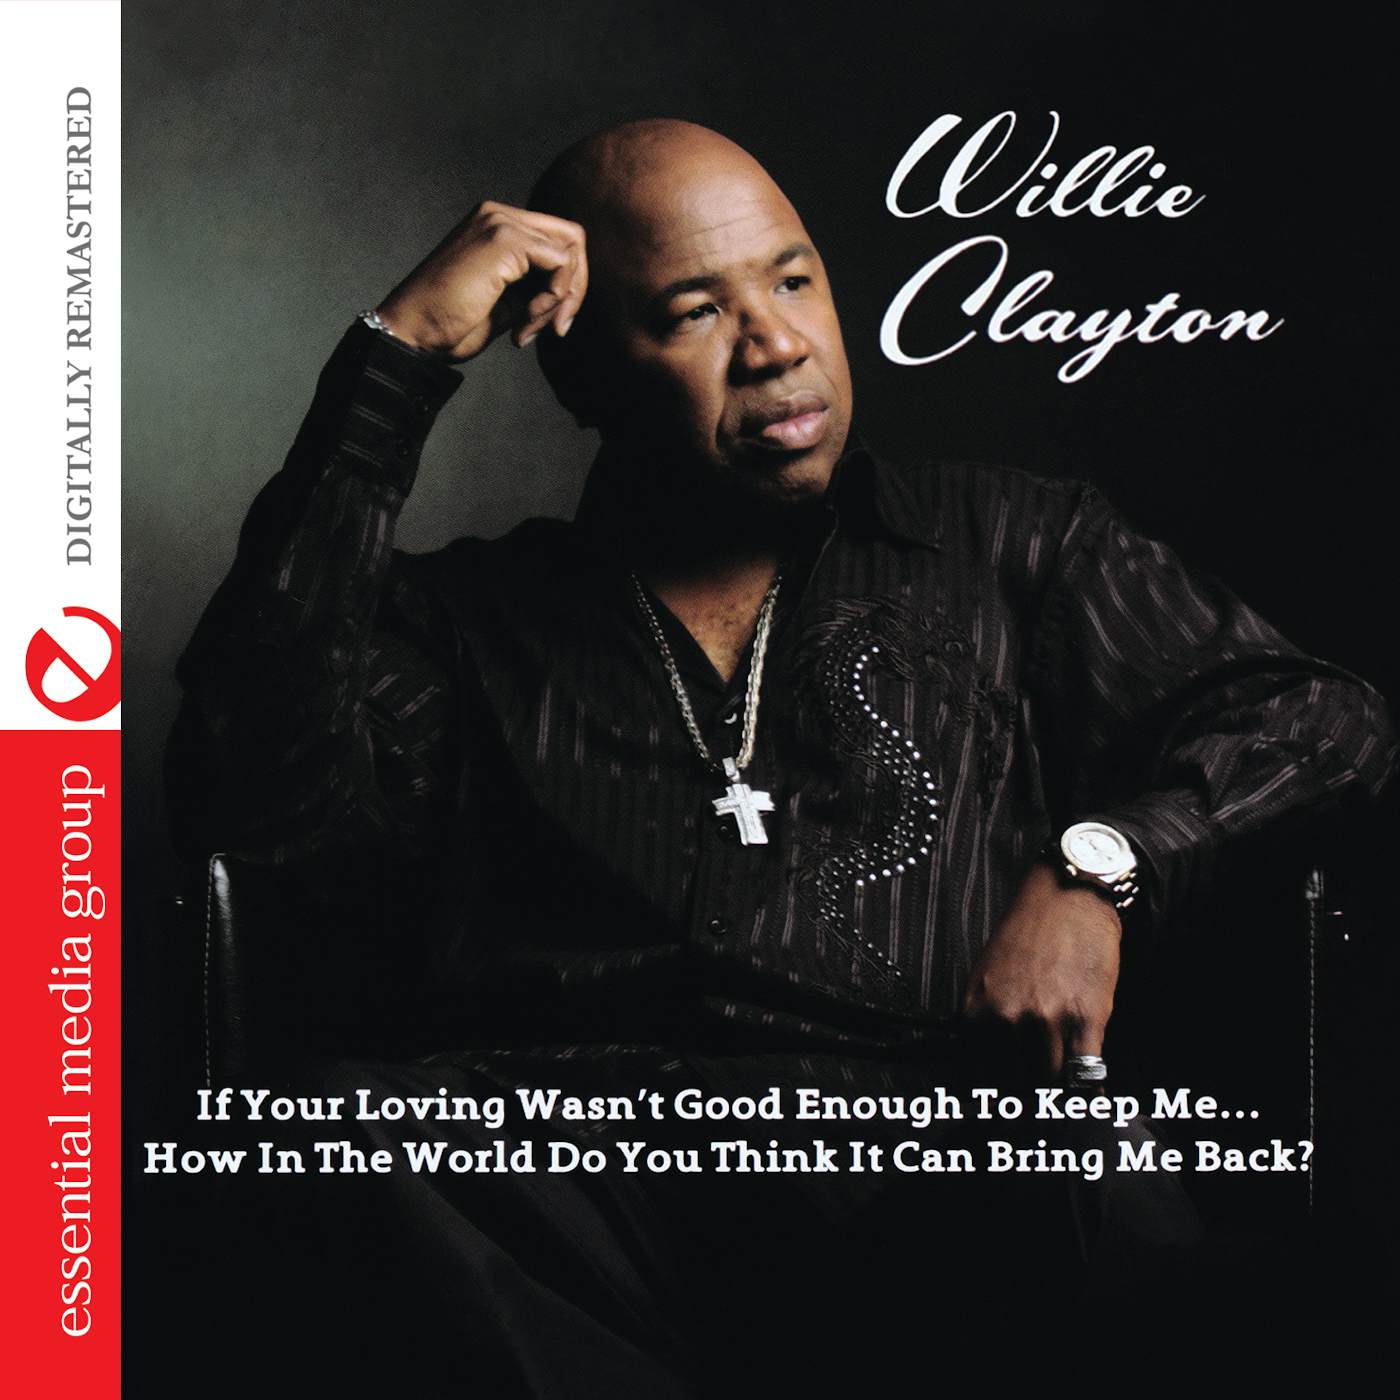 Willie Clayton IF YOUR LOVING WASN'T GOOD ENOUGH TO KEEP ME...HOW CD